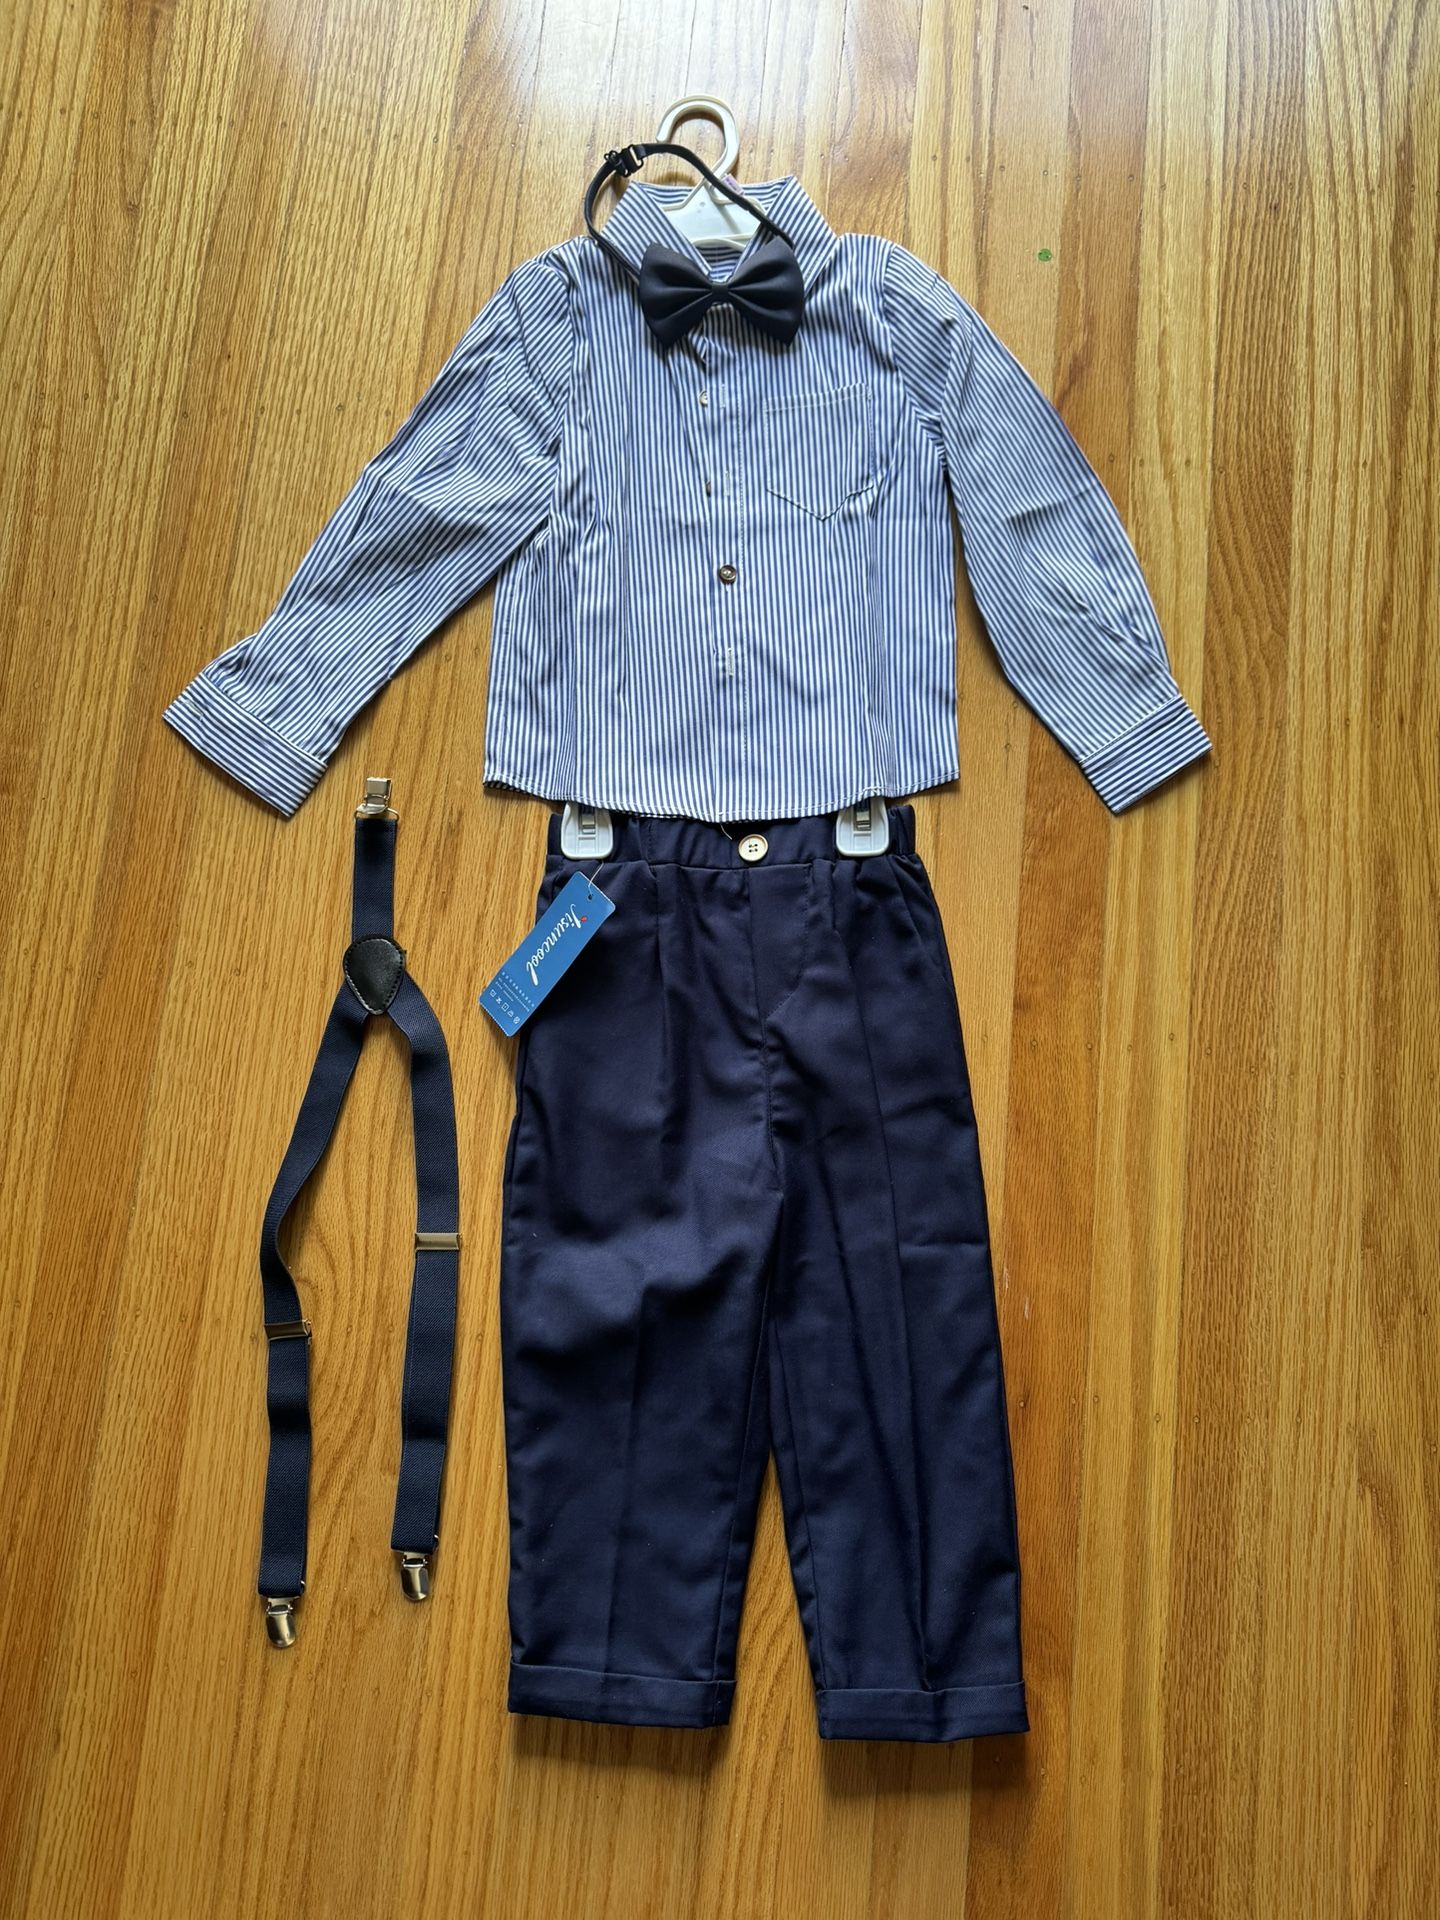 NWT! Brand new! Boys 4pcs suit set formal dress  Size: 3 years old  Good for Wedding, Birthday, New Year , school event etc.